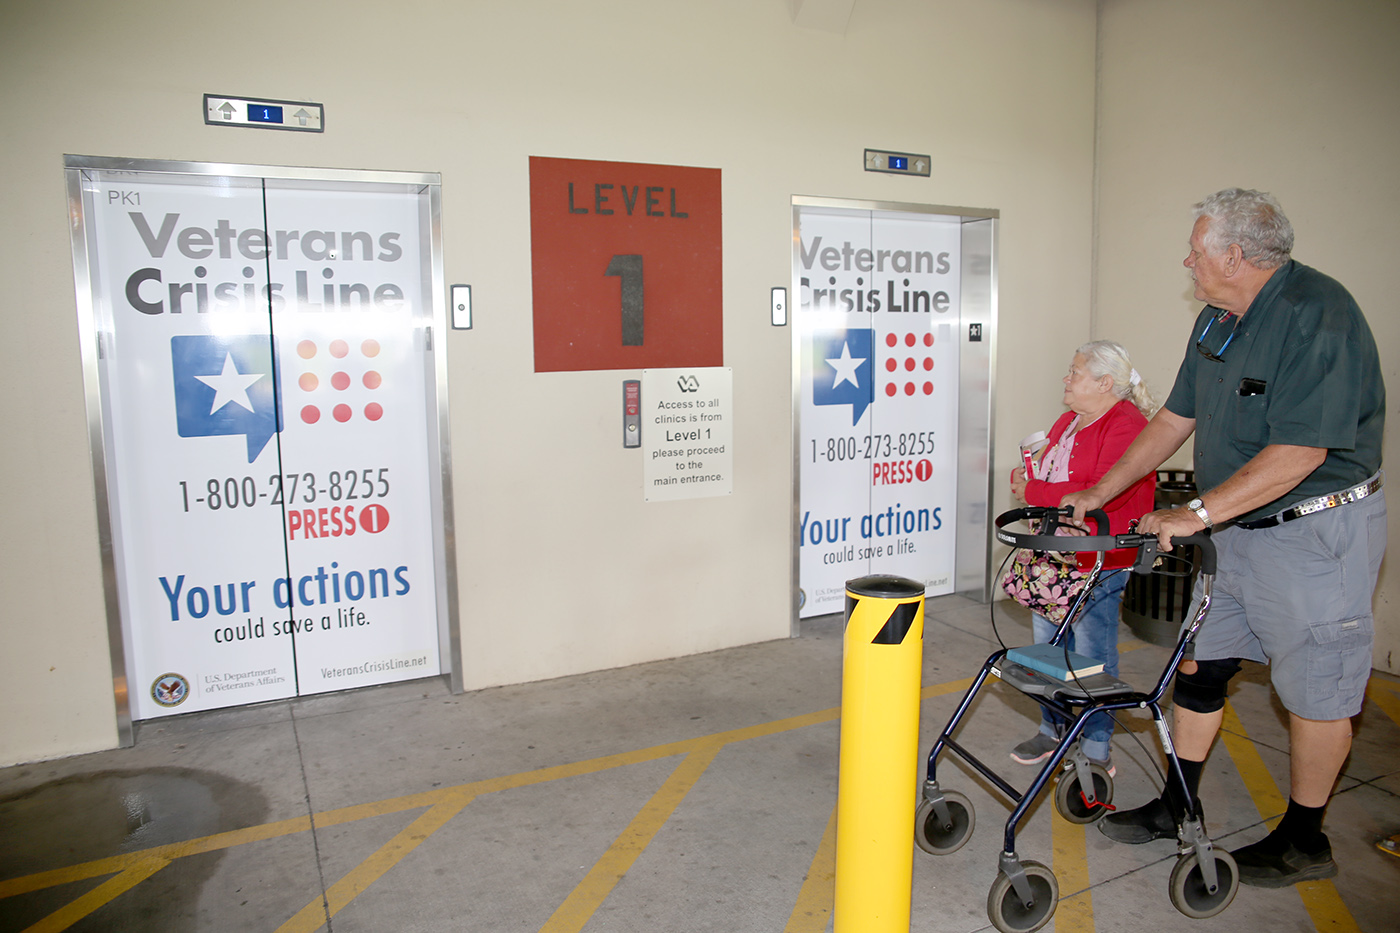 Navy Veteran Richard W. Noyes and his wife Mary notice the newly decorated elevator doors with the Veterans Crisis Line logo and number as they make their way back to their vehicle after visiting the VA Health Care Center at Harlingen, Texas, on September 11, 2018.